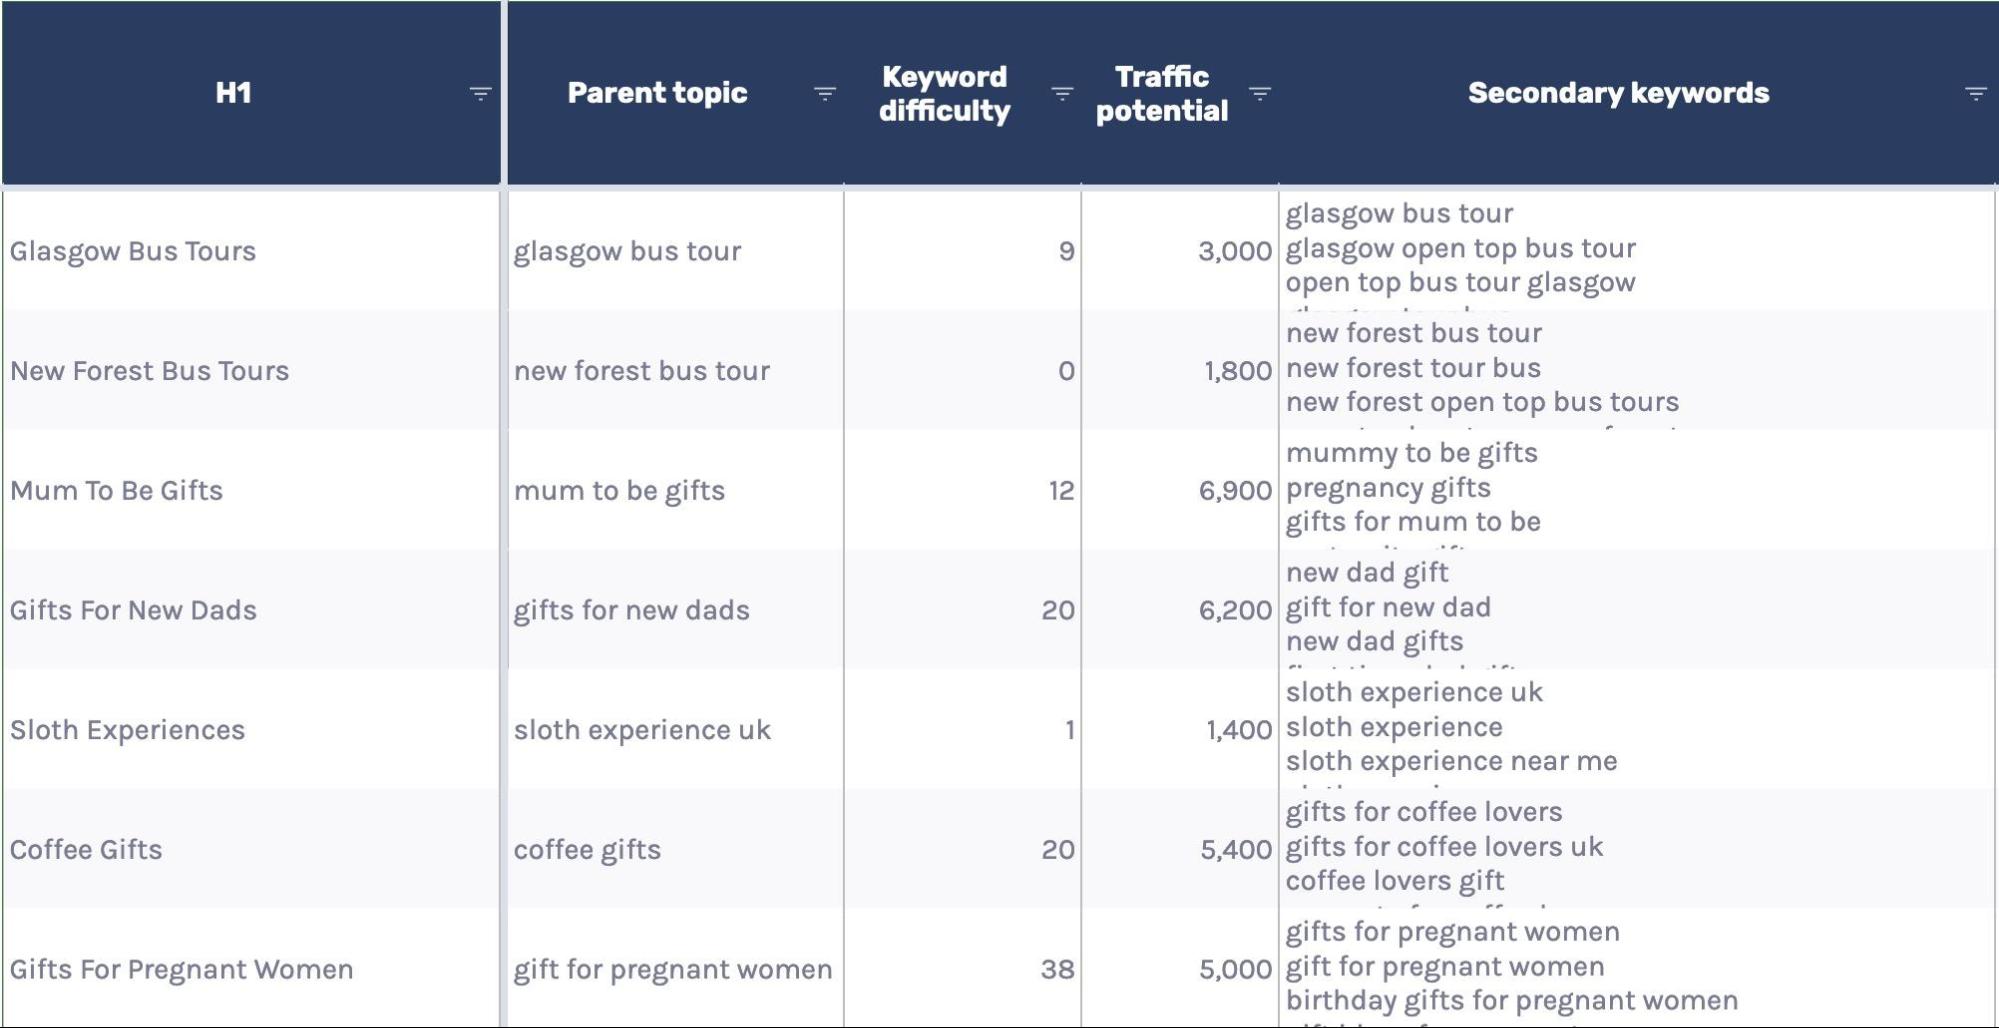 Keyword research results table